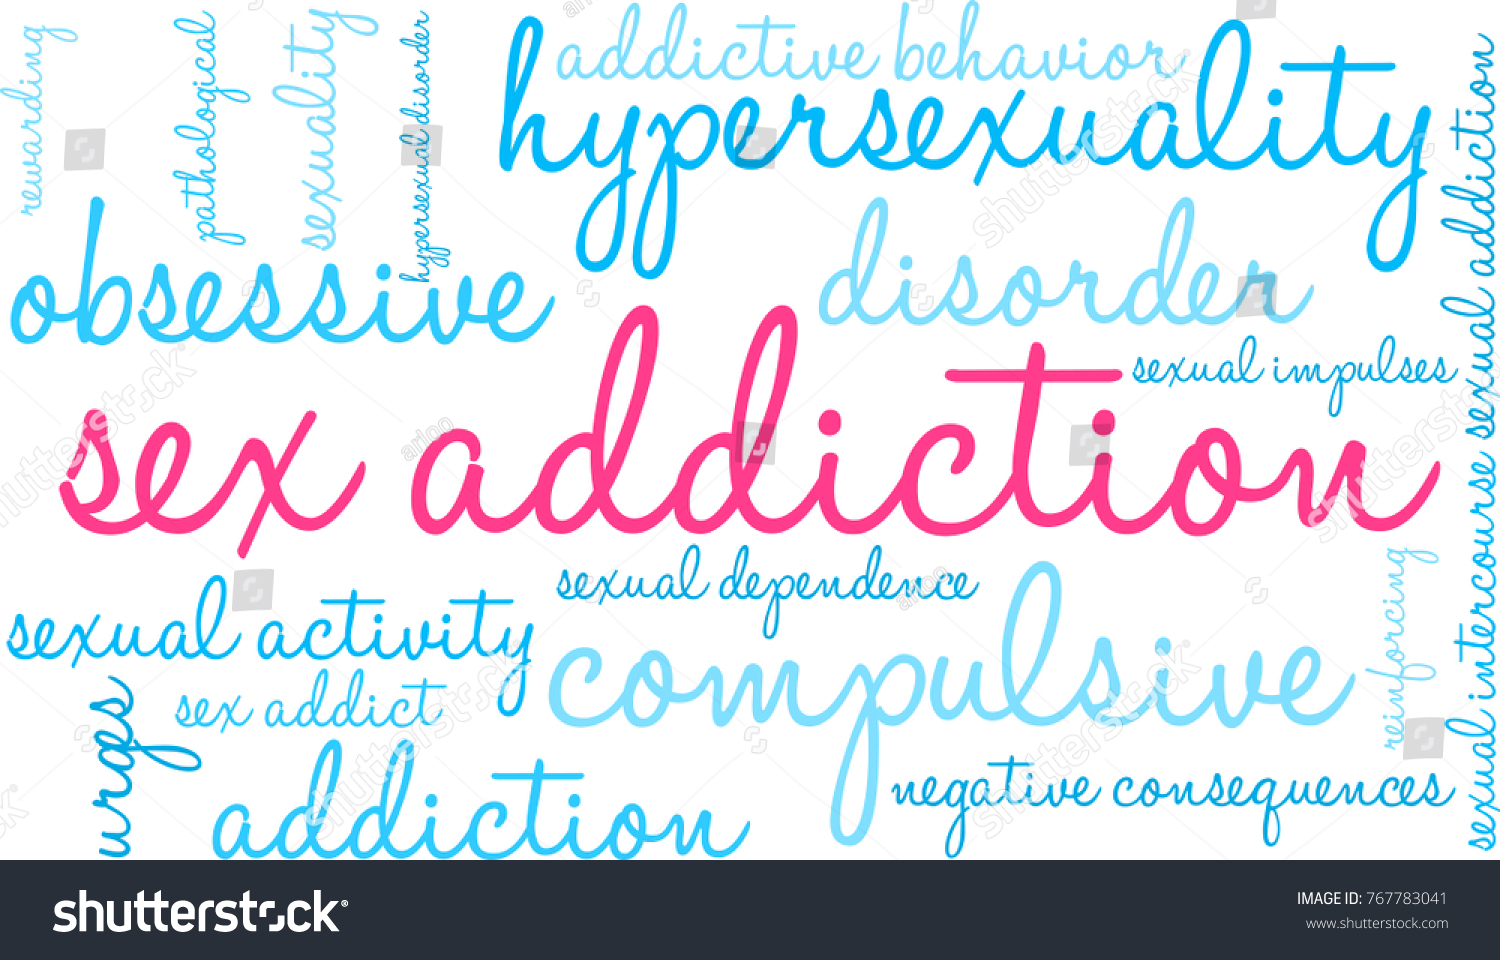 Sex Addiction Word Cloud On A White Background Royalty Free Stock Vector 767783041